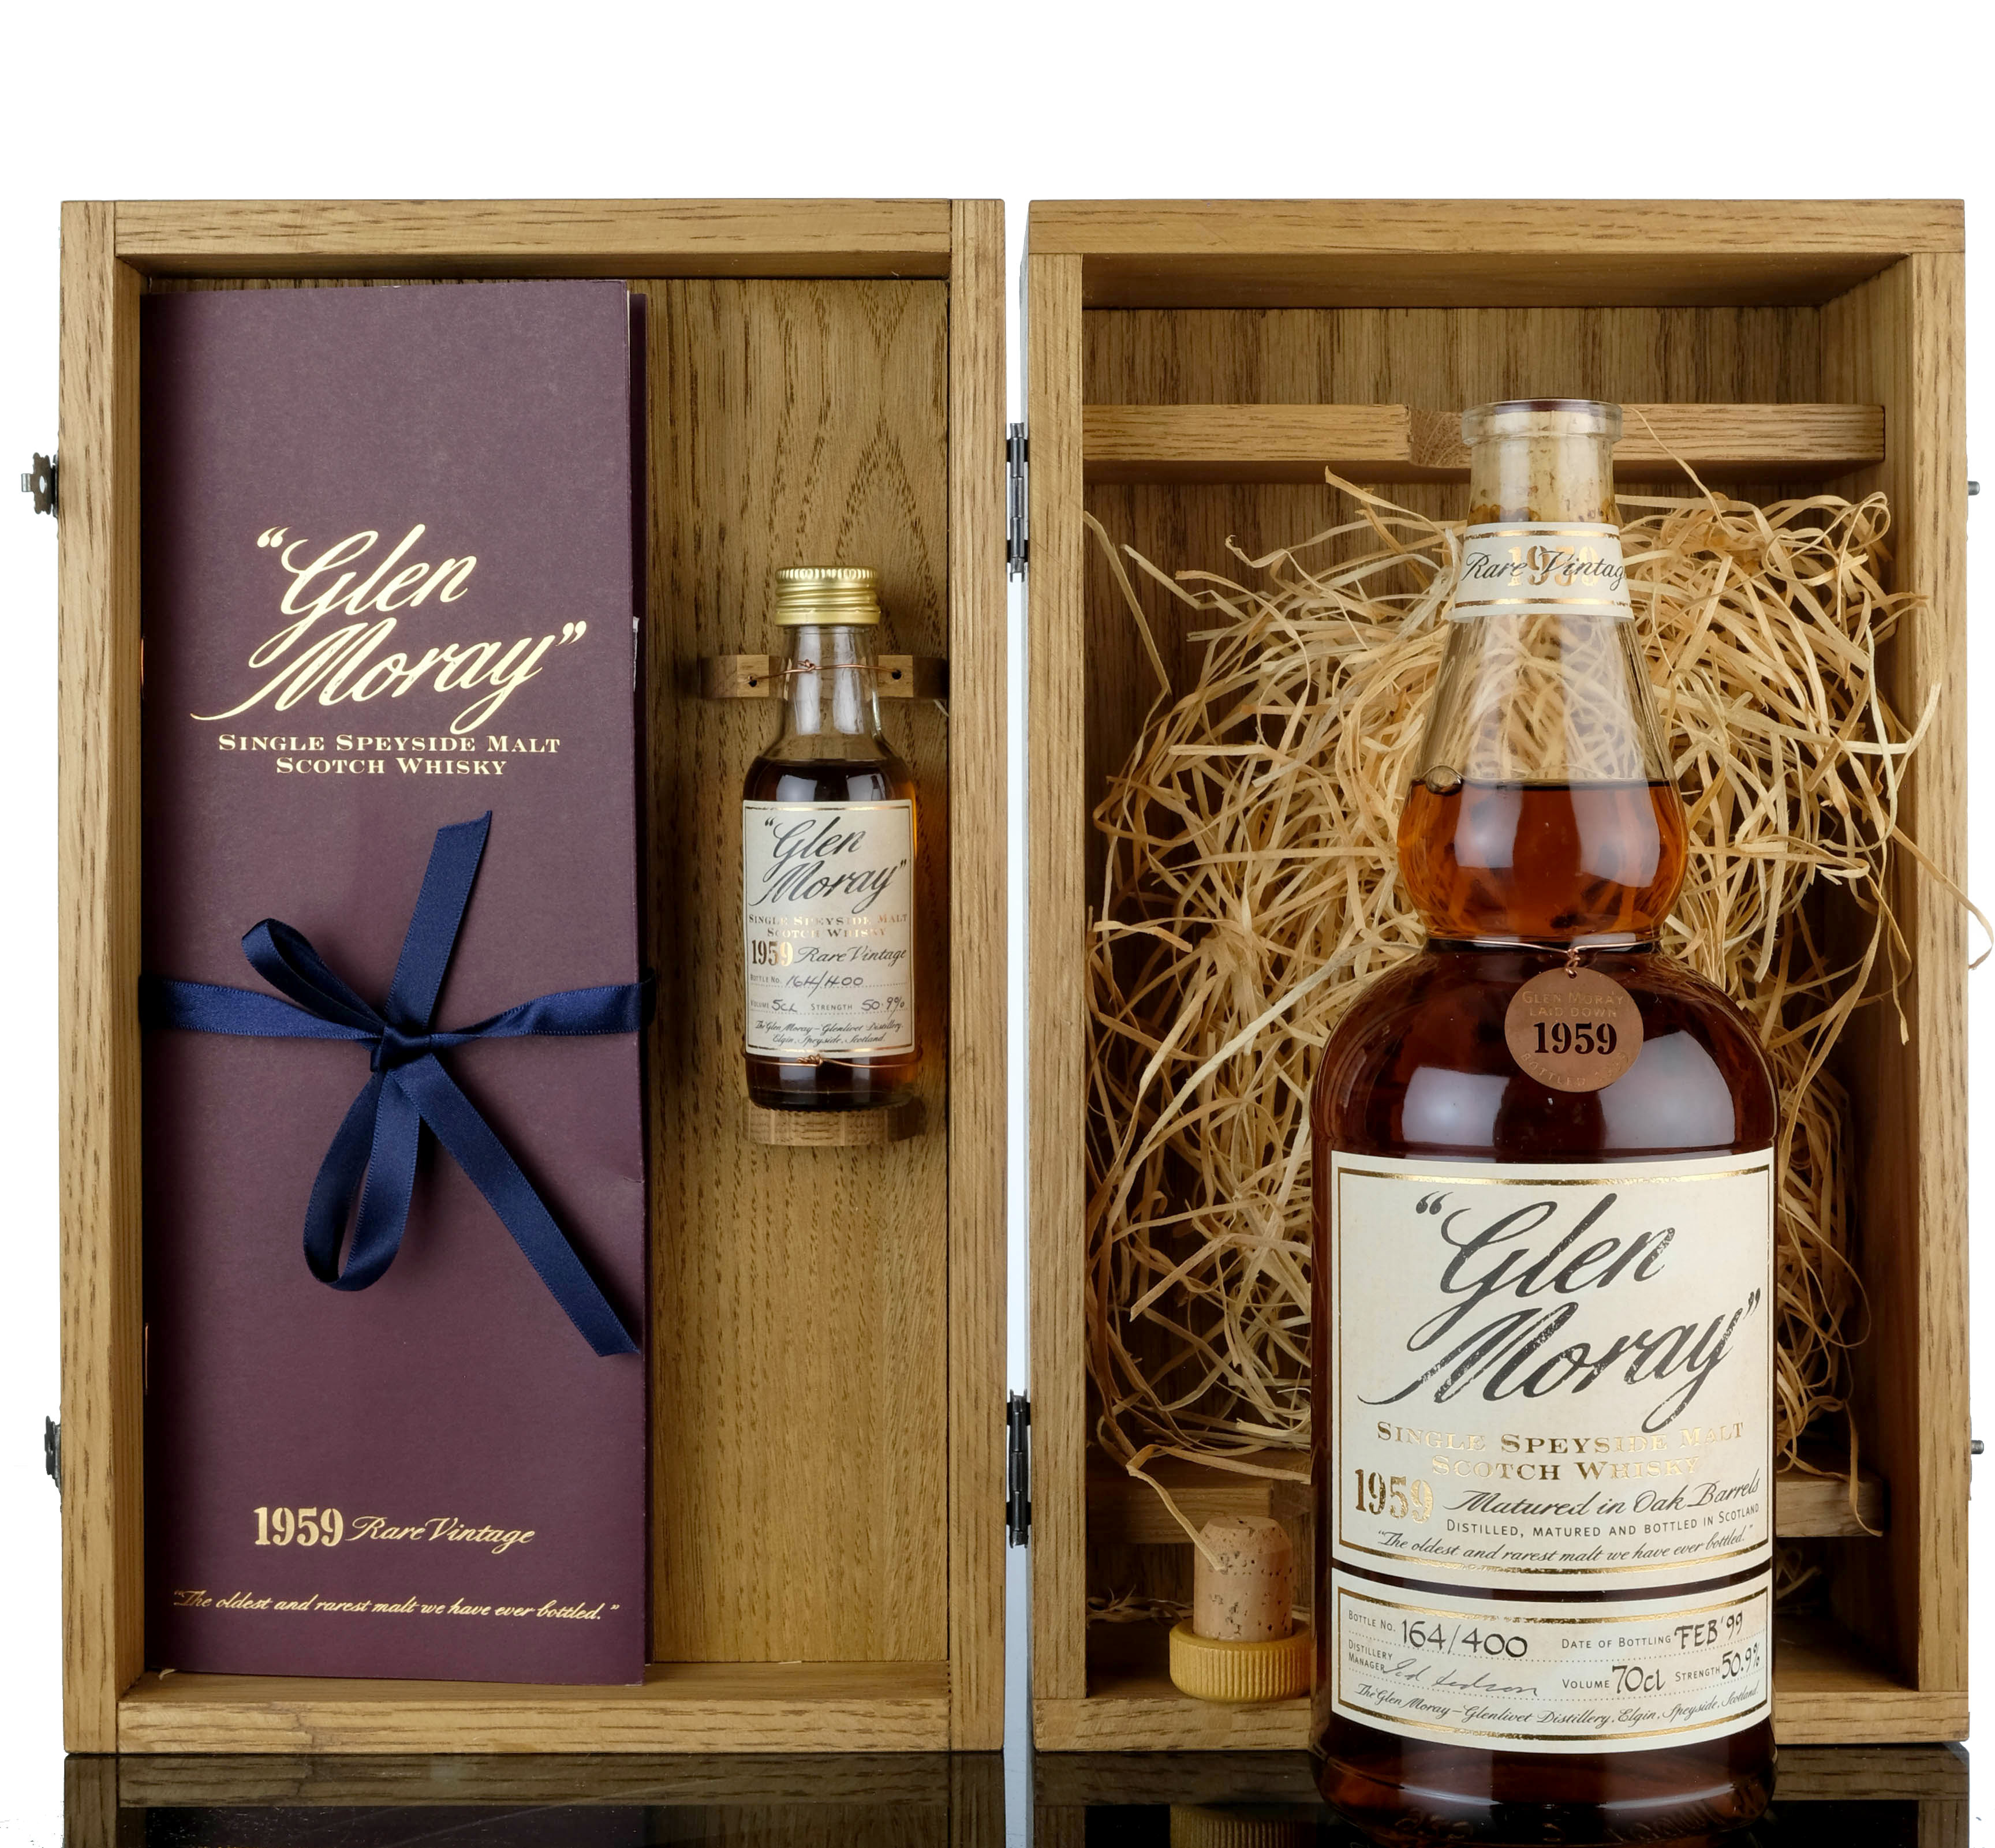 Glen Moray 1959-1999 - 40 Year Old - With Miniature